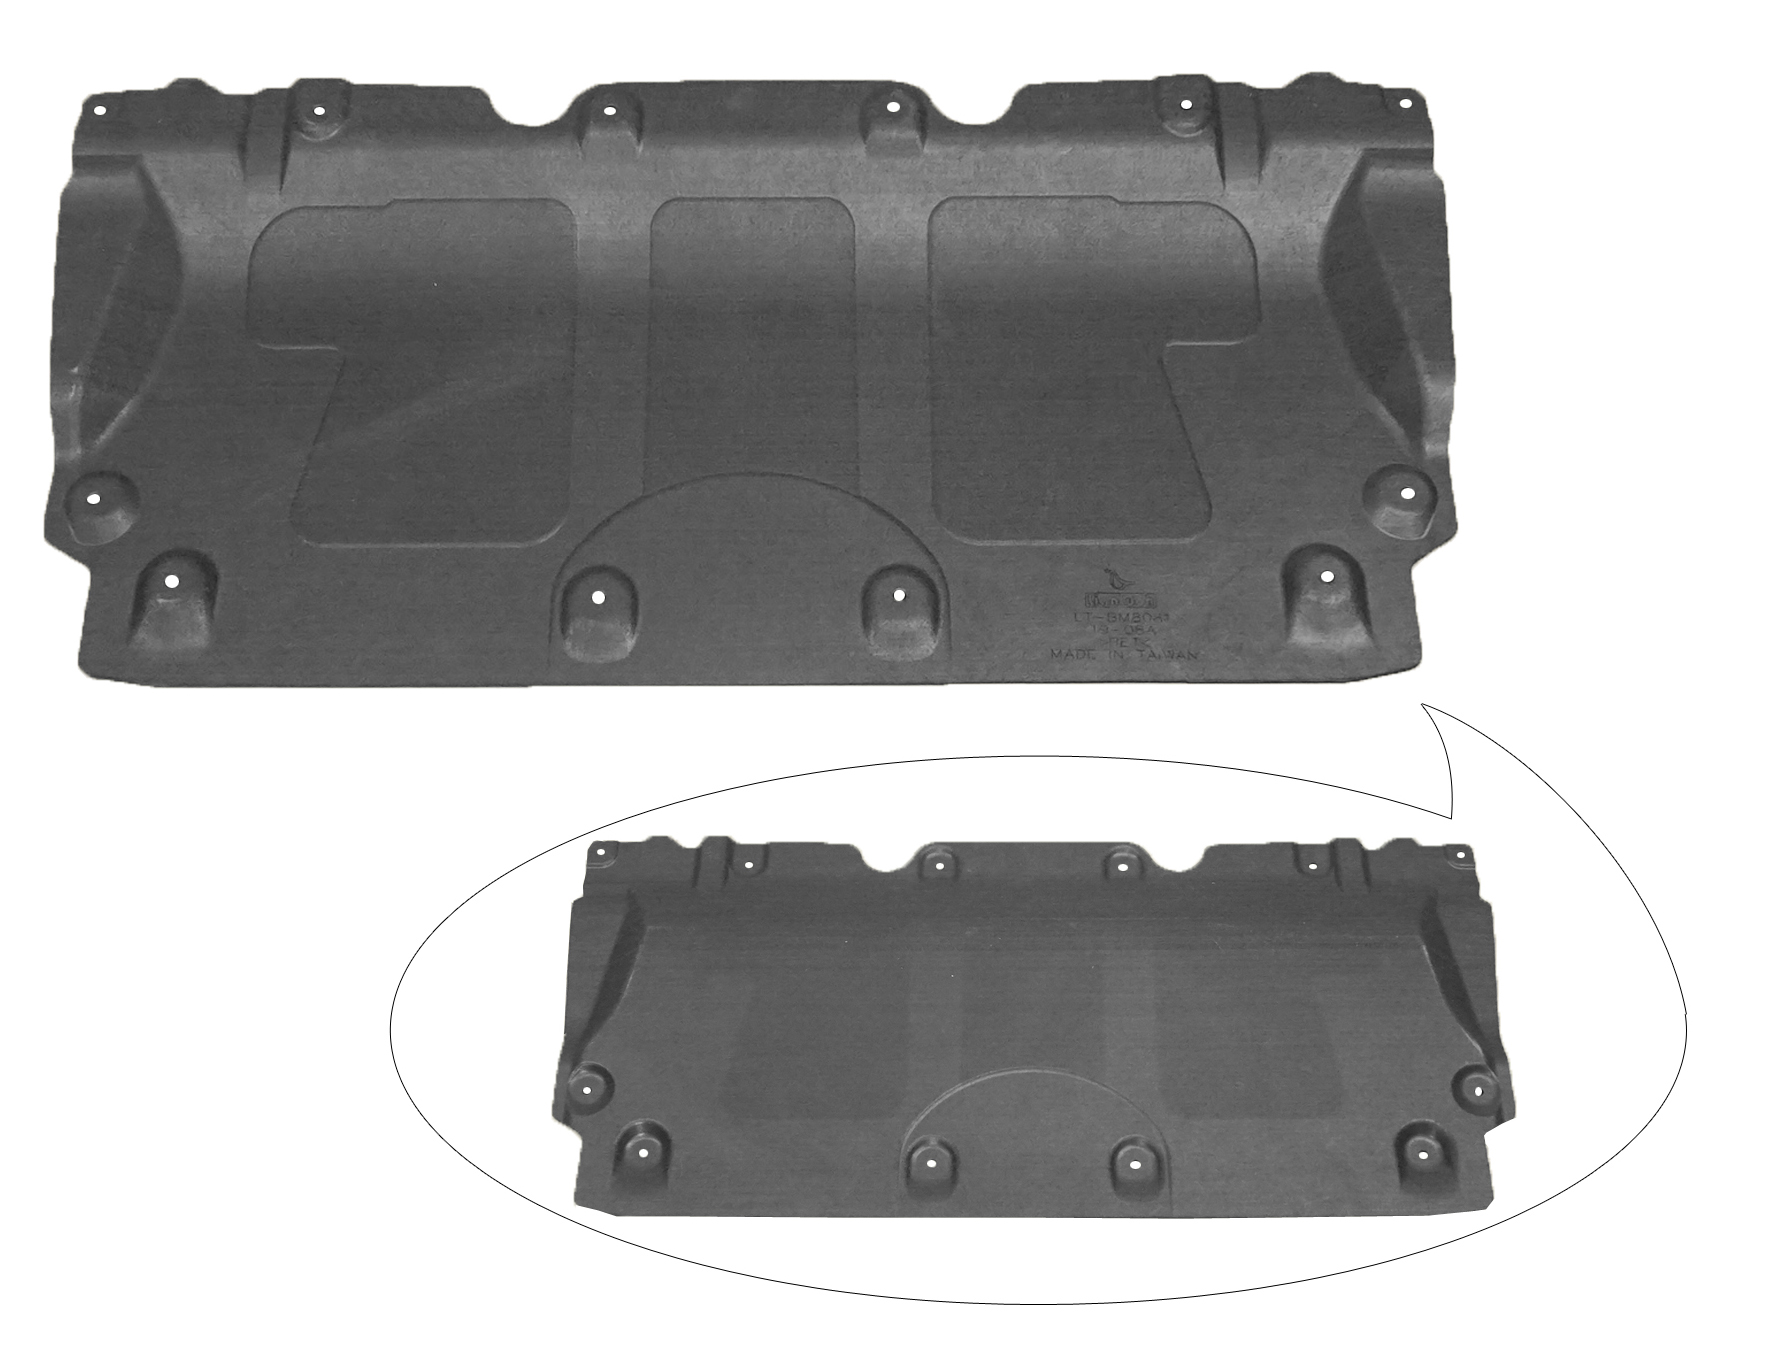 Aftermarket UNDER ENGINE COVERS for BMW - M340I XDRIVE, M340i xDrive,20-22,Lower engine cover